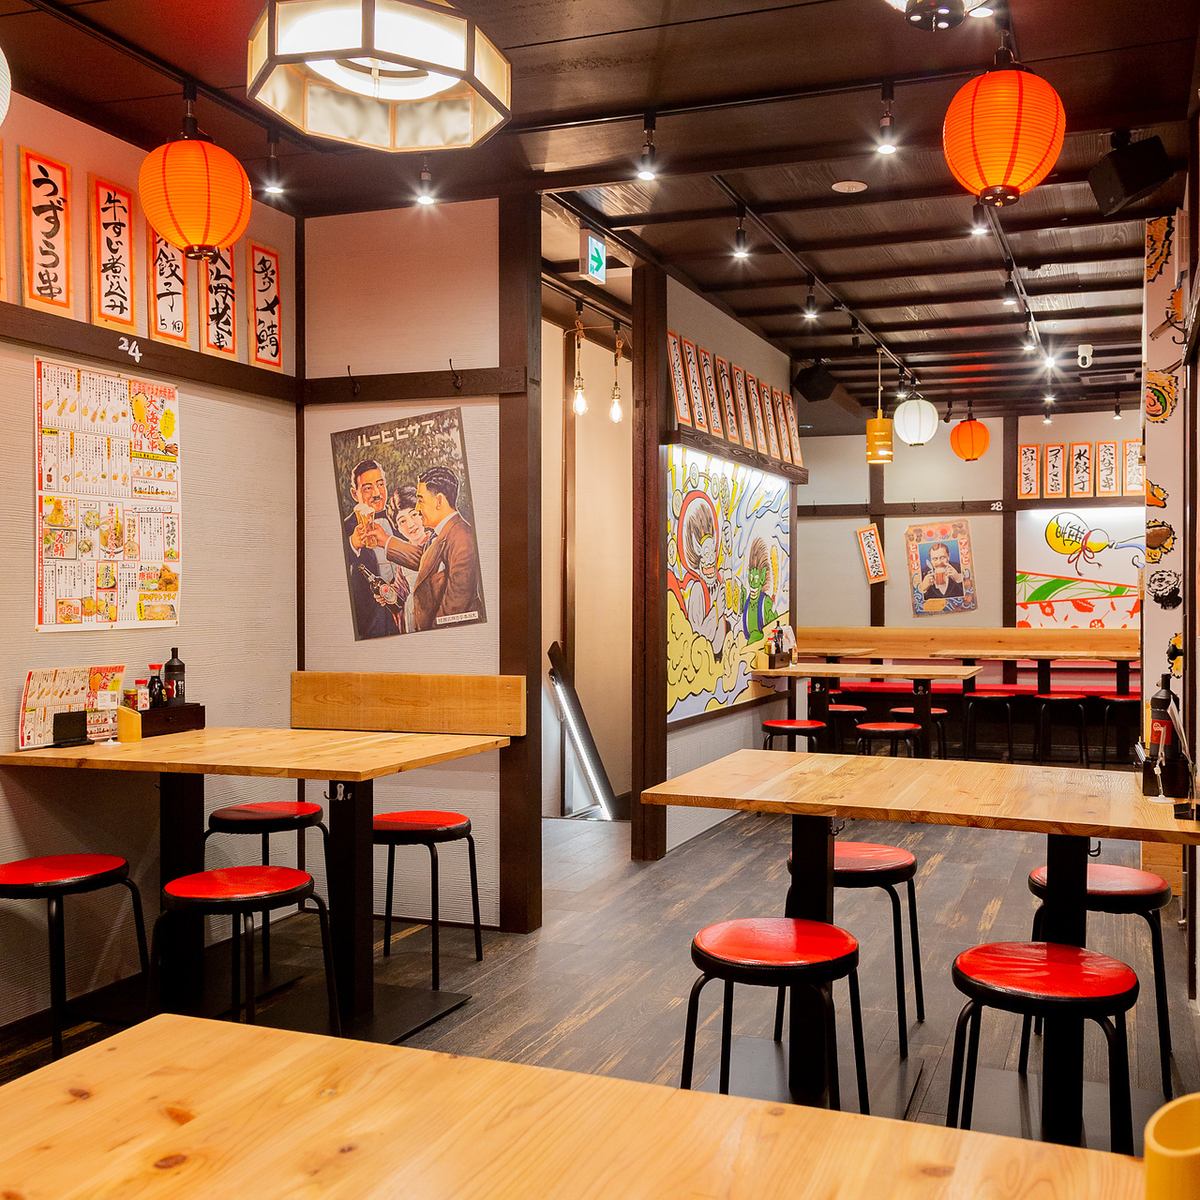 You can enjoy your banquet in our spacious restaurant♪ Authentic Kyoto Kushiage